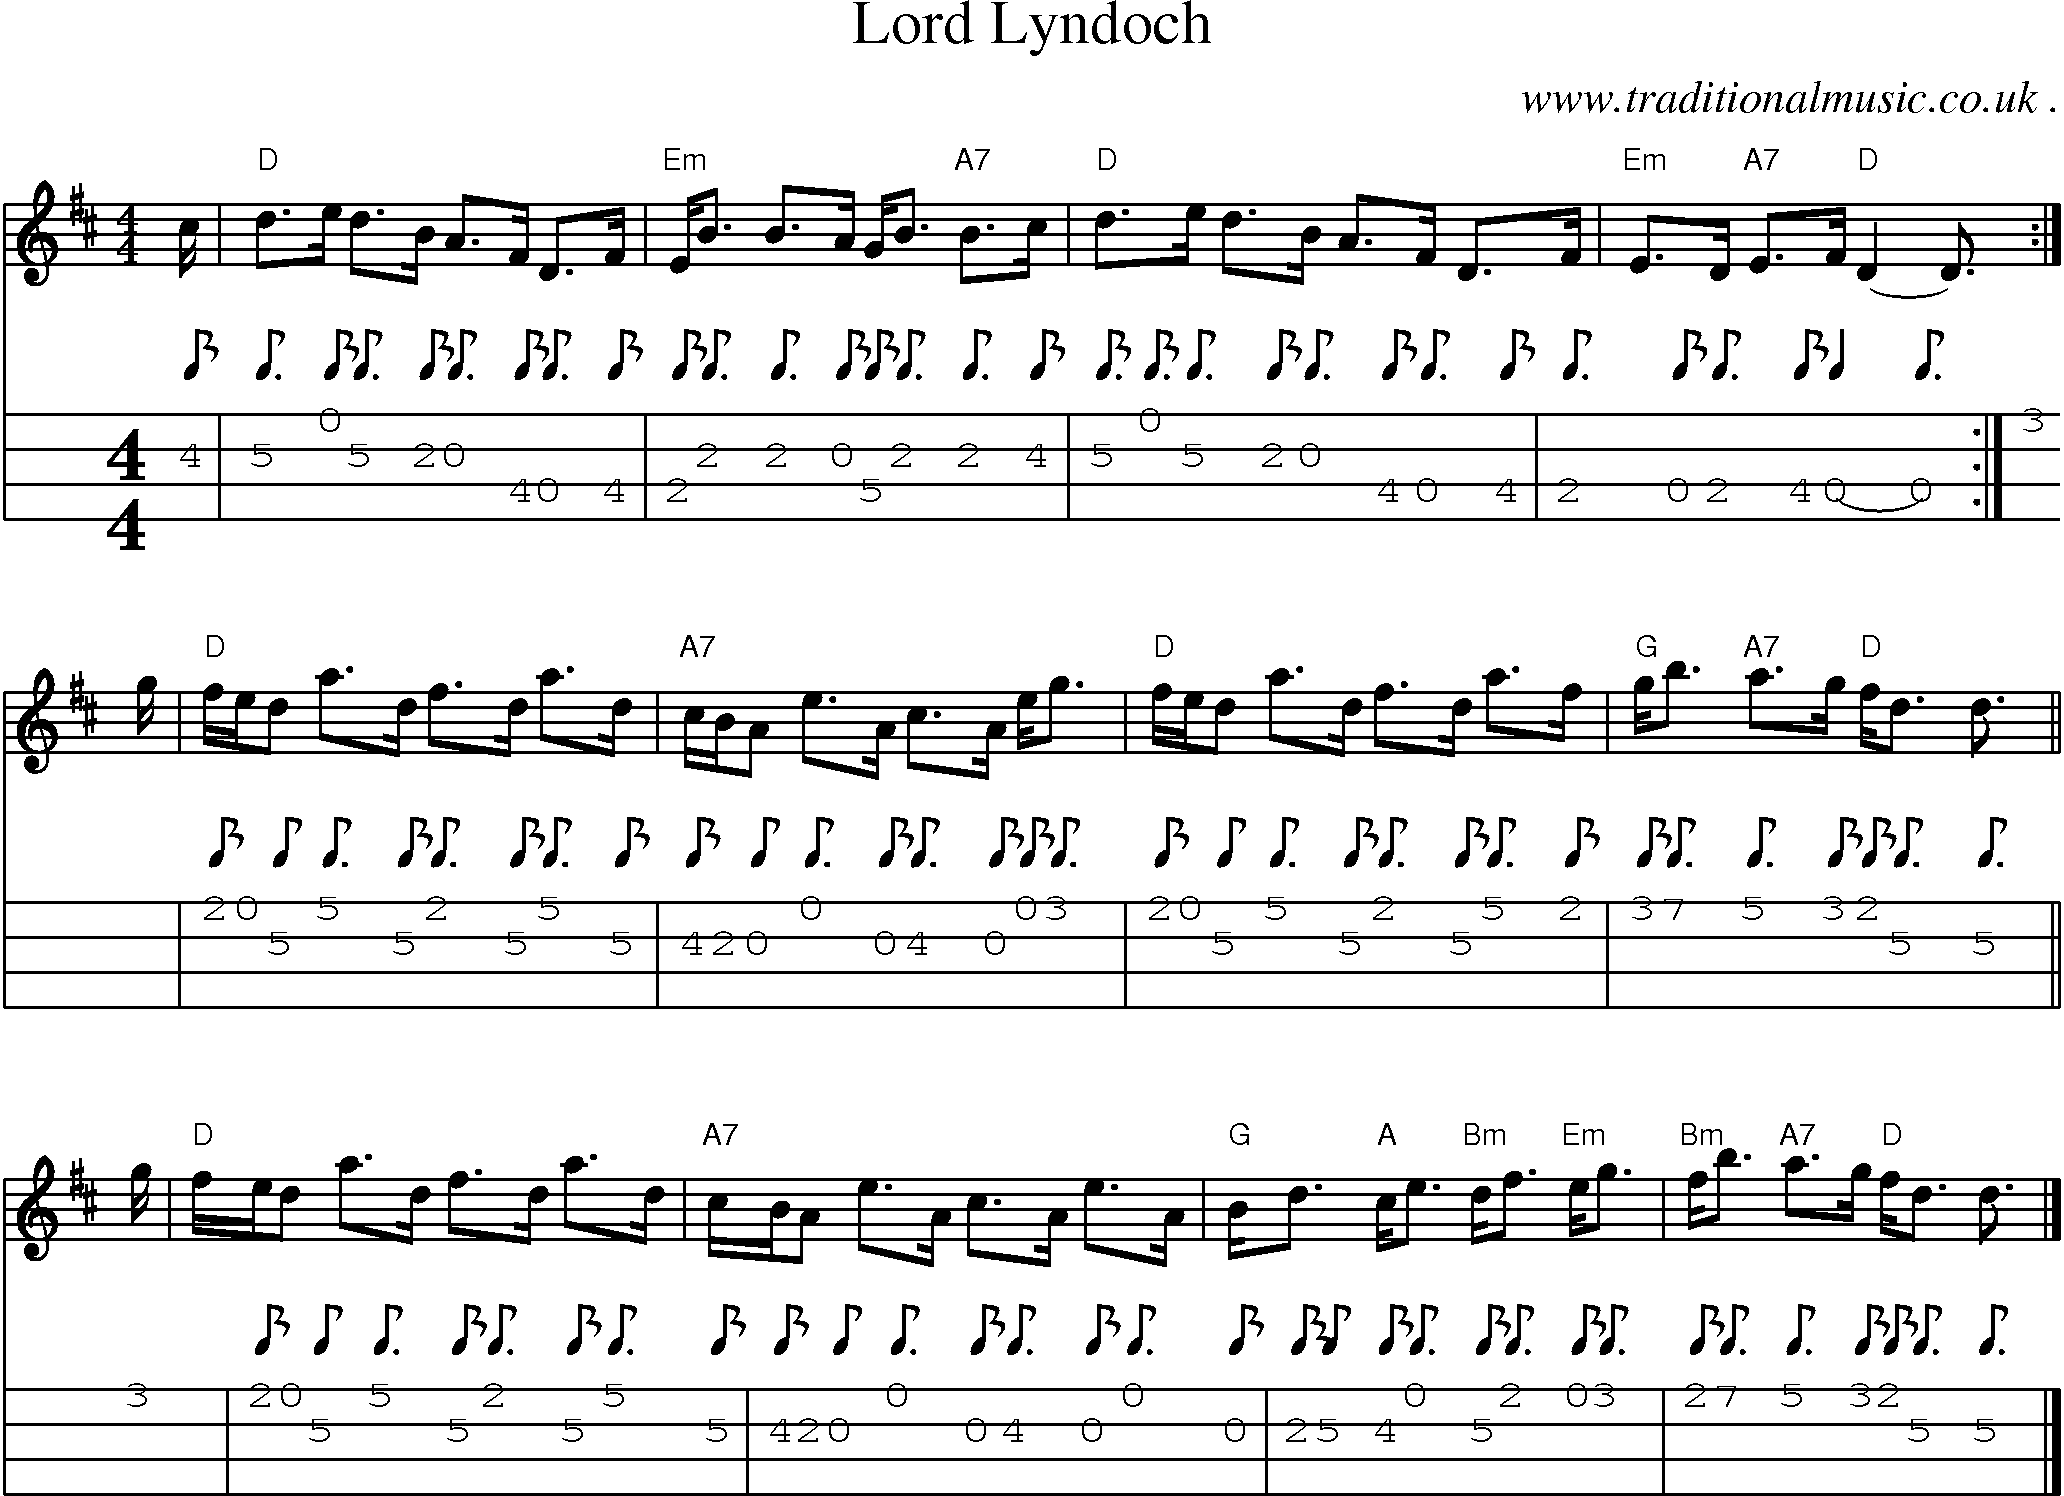 Sheet-music  score, Chords and Mandolin Tabs for Lord Lyndoch